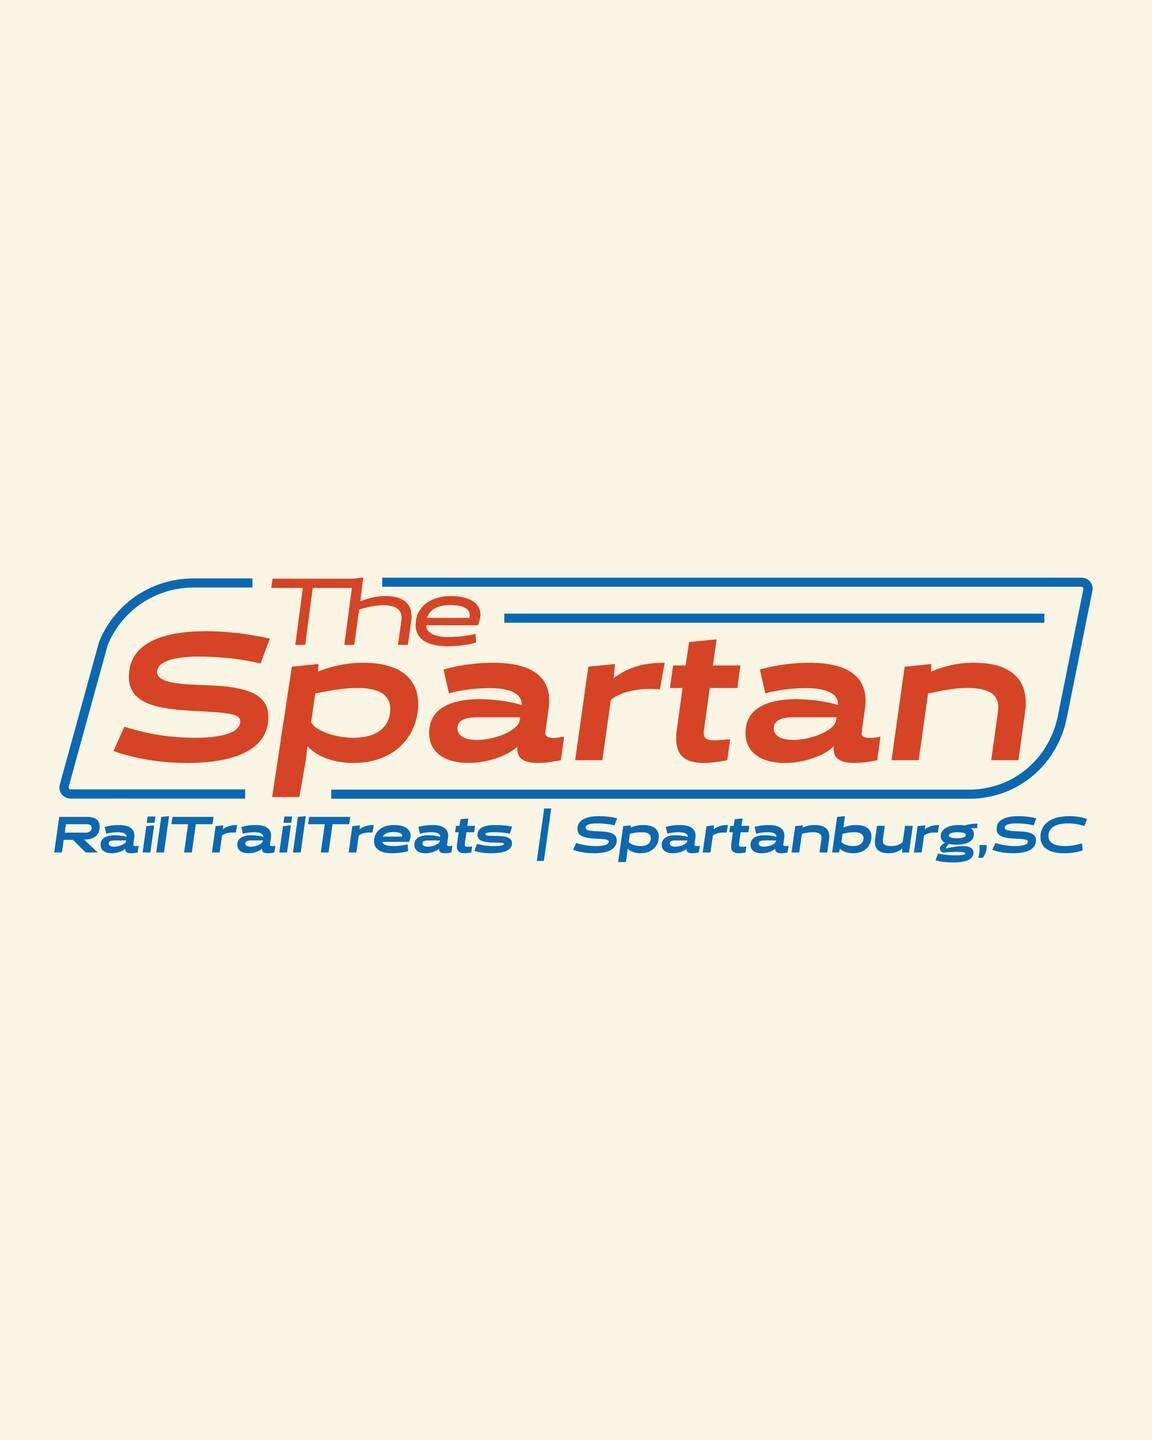 If you've been to Fretwell in Spartanburg, SC, you've seen the converted Spartan Mansion travel trailer permanent food truck. The Spartan Mansion's hay day was the 1950's &amp; 60's. This logo's colors and typography are meant to subtly nod to that e